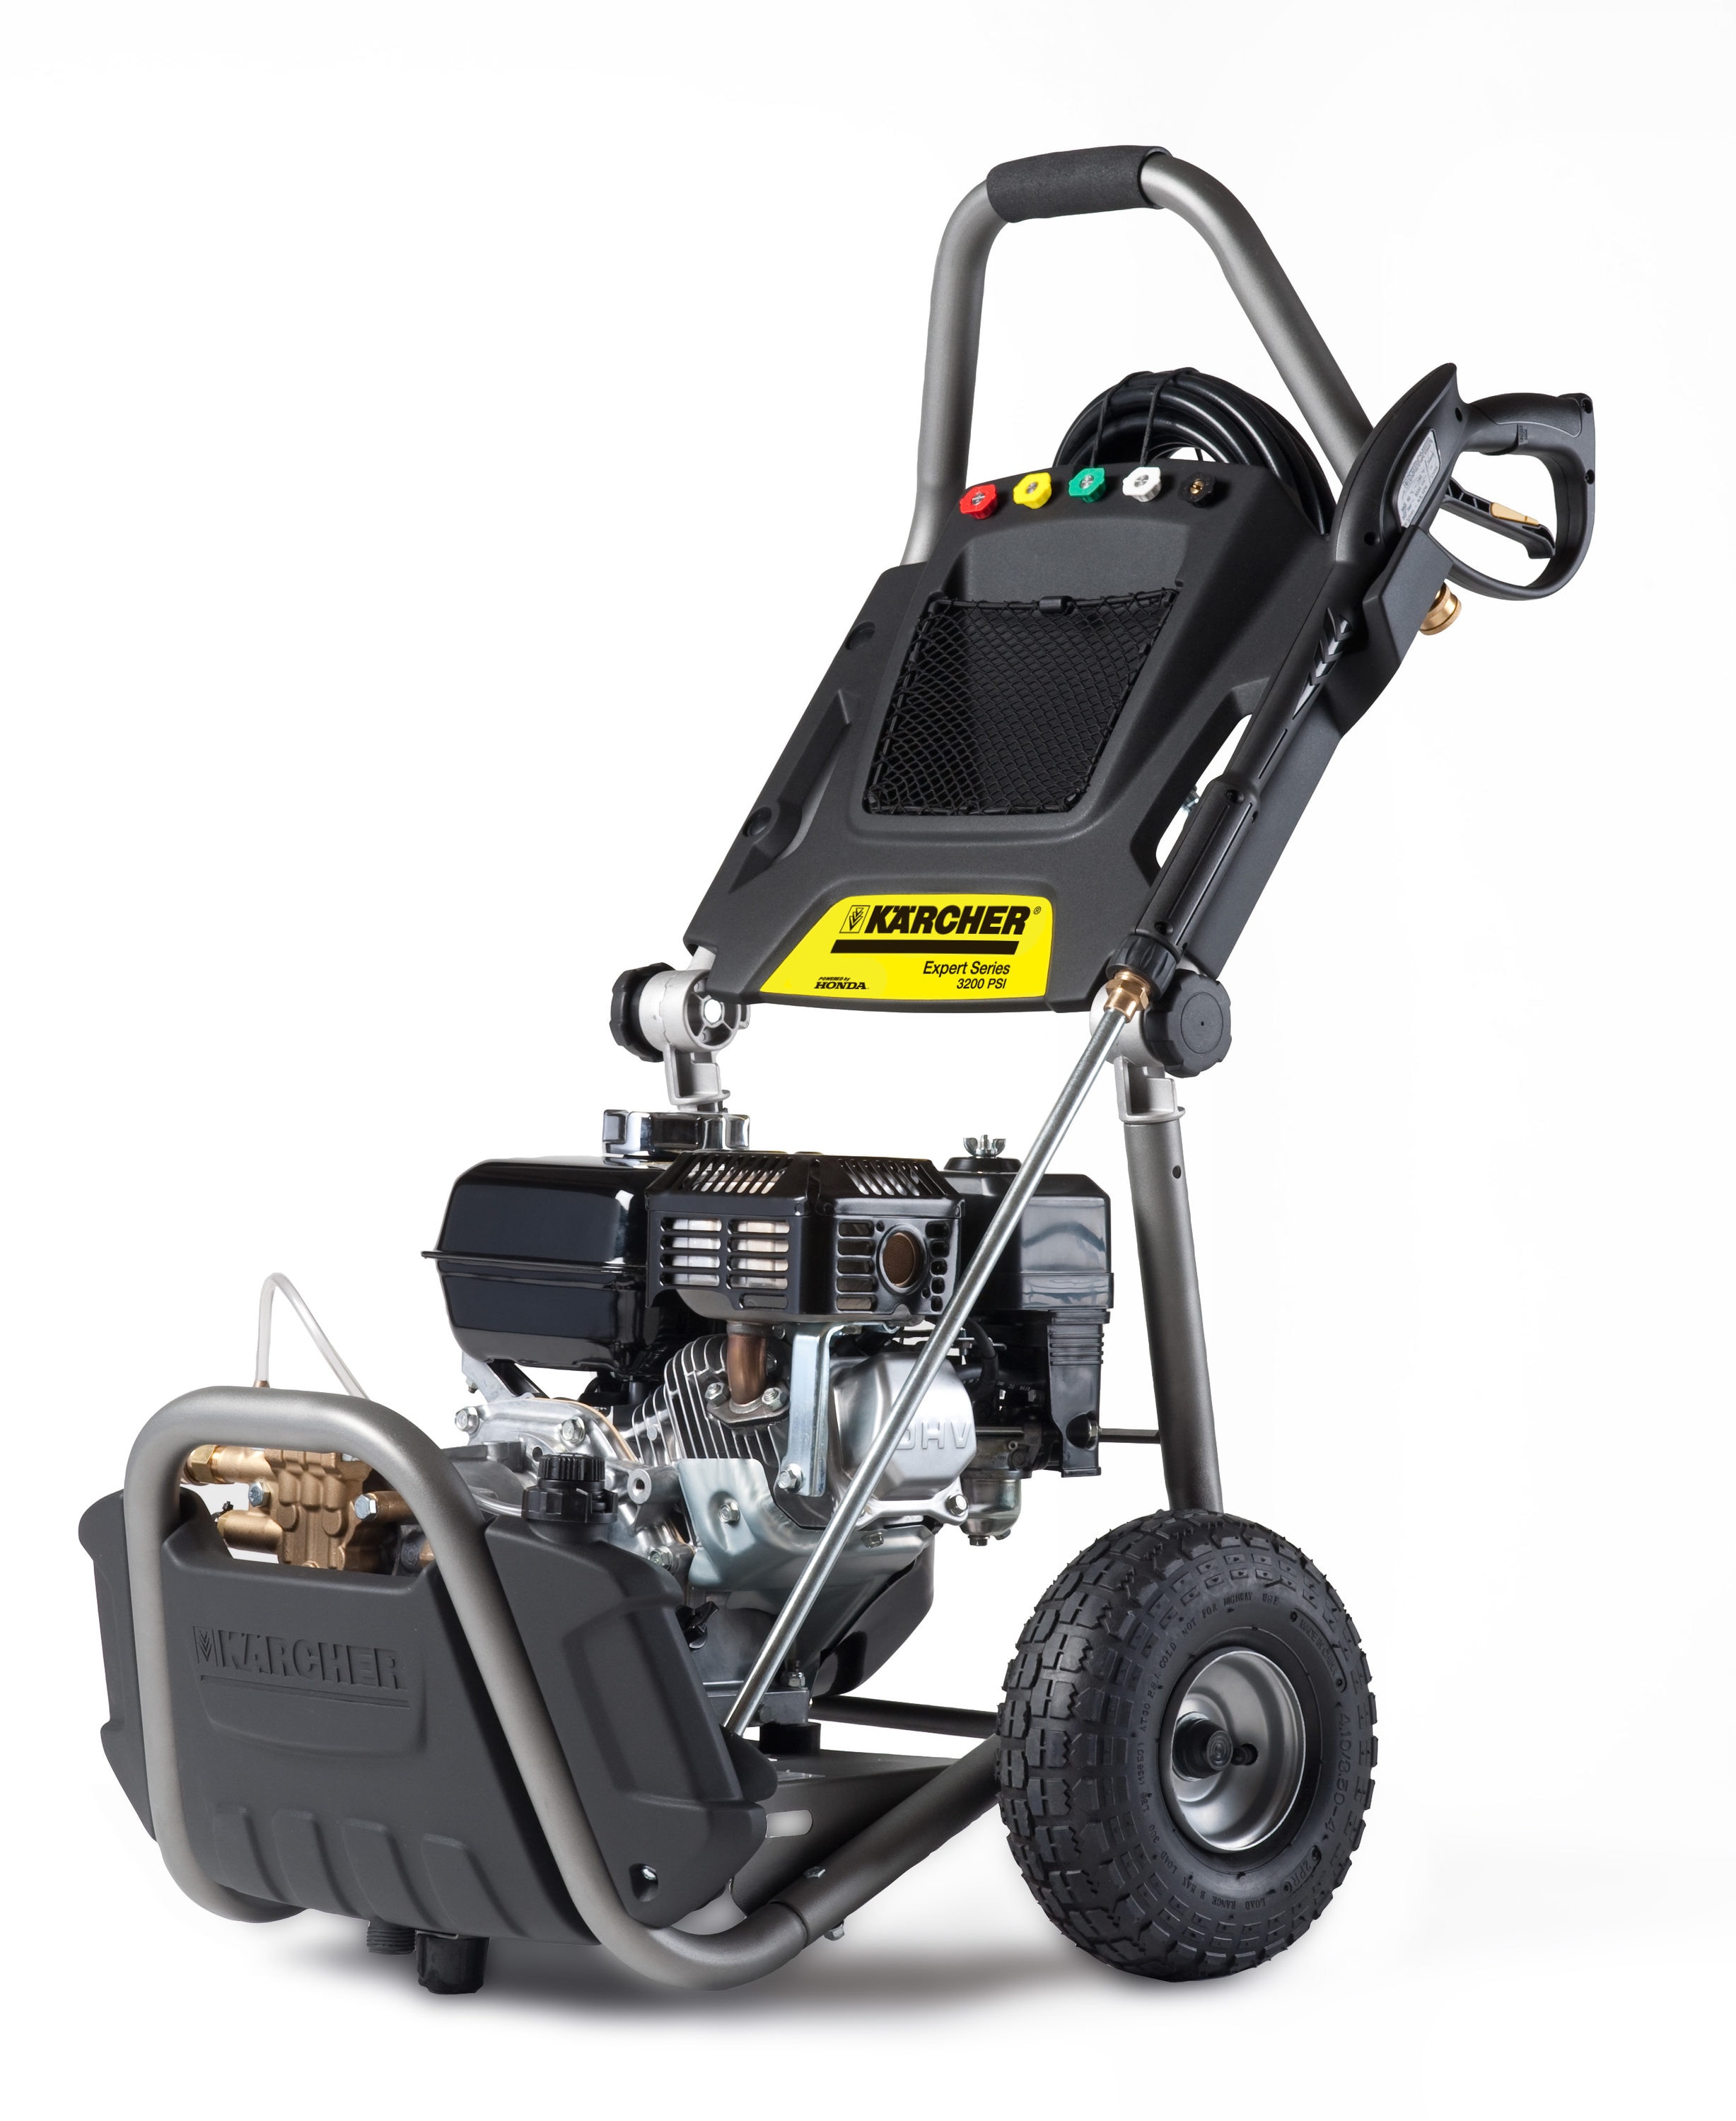 Karcher 3200 Cold Water Gas Pressure Washer (CARB) at Lowes.com